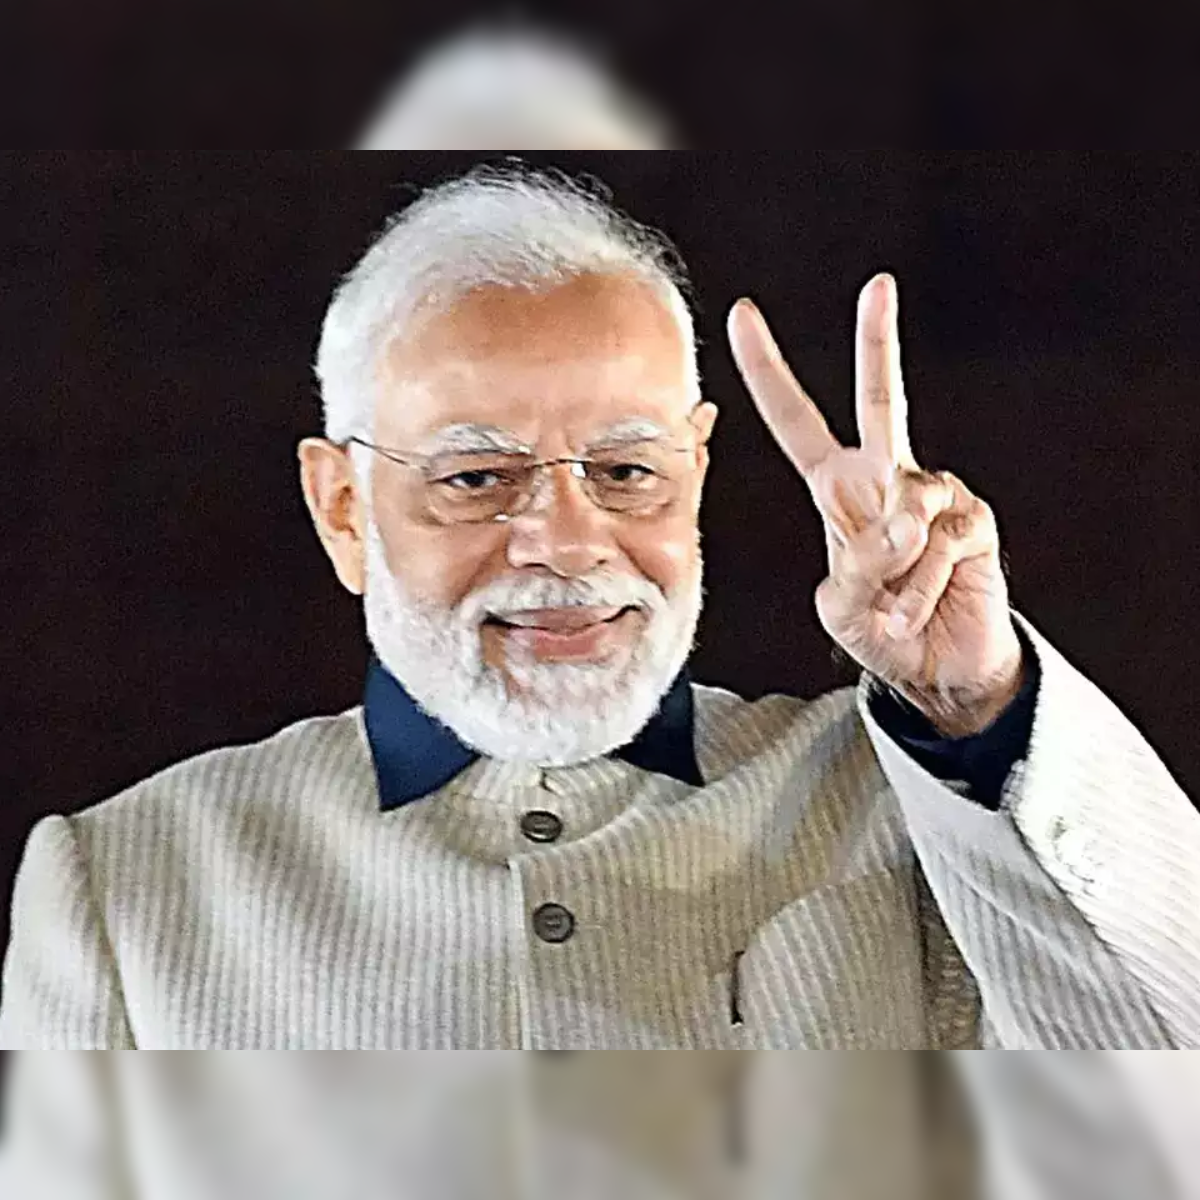 BJP leaders hail Modi tops list of most popular global leader with 76%  rating | Latest News India - Hindustan Times